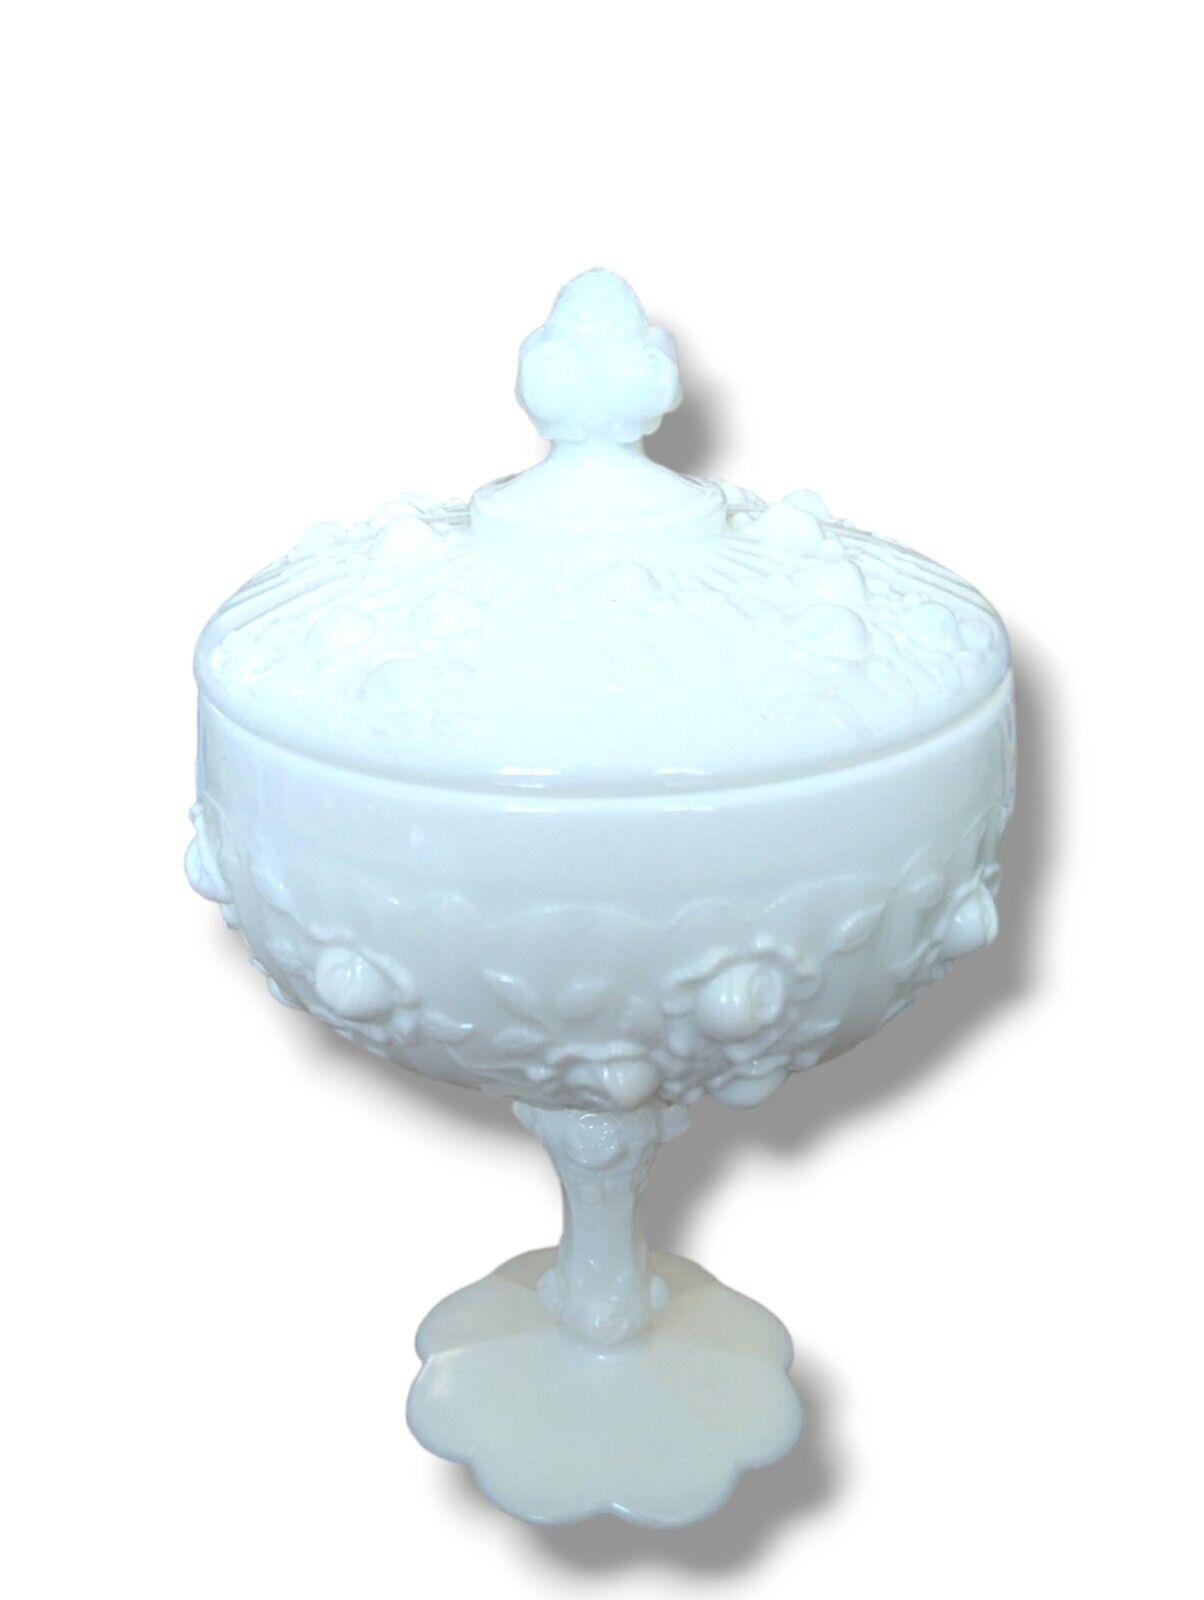 Fenton Milk Glass Cabbage Rose Covered Candy Dish Bowl Pedestal Foot Compote